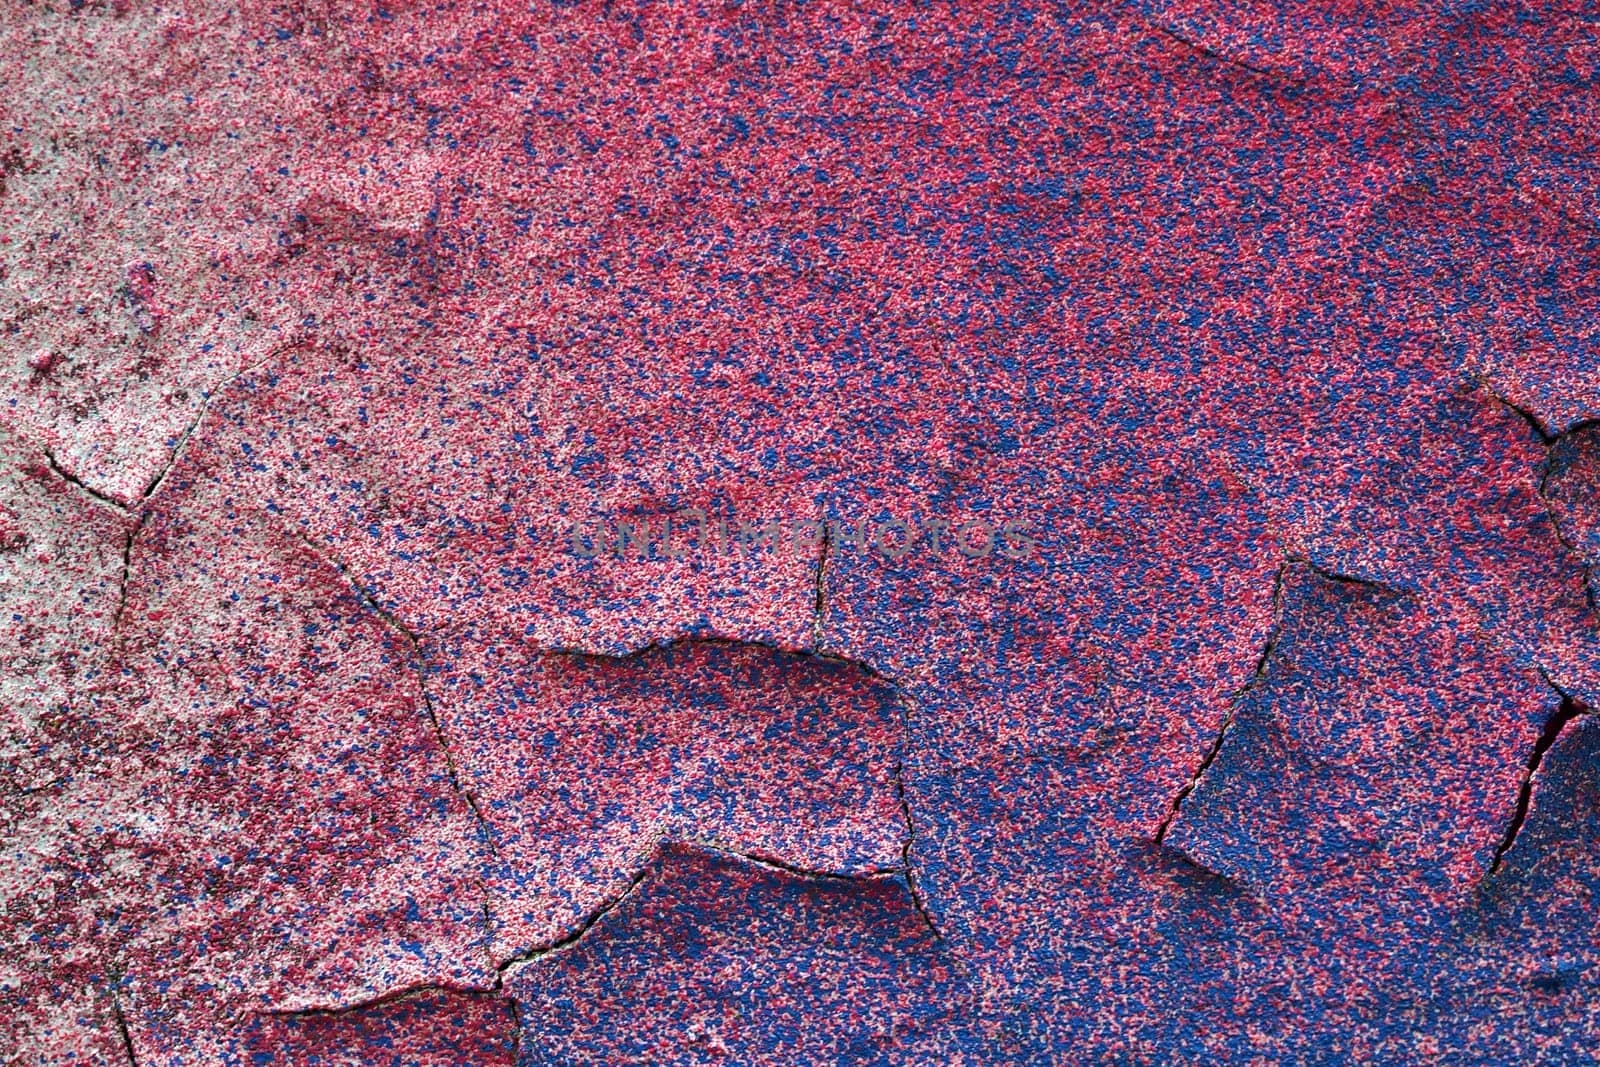 Cracked paint. Pink background with blue spots.